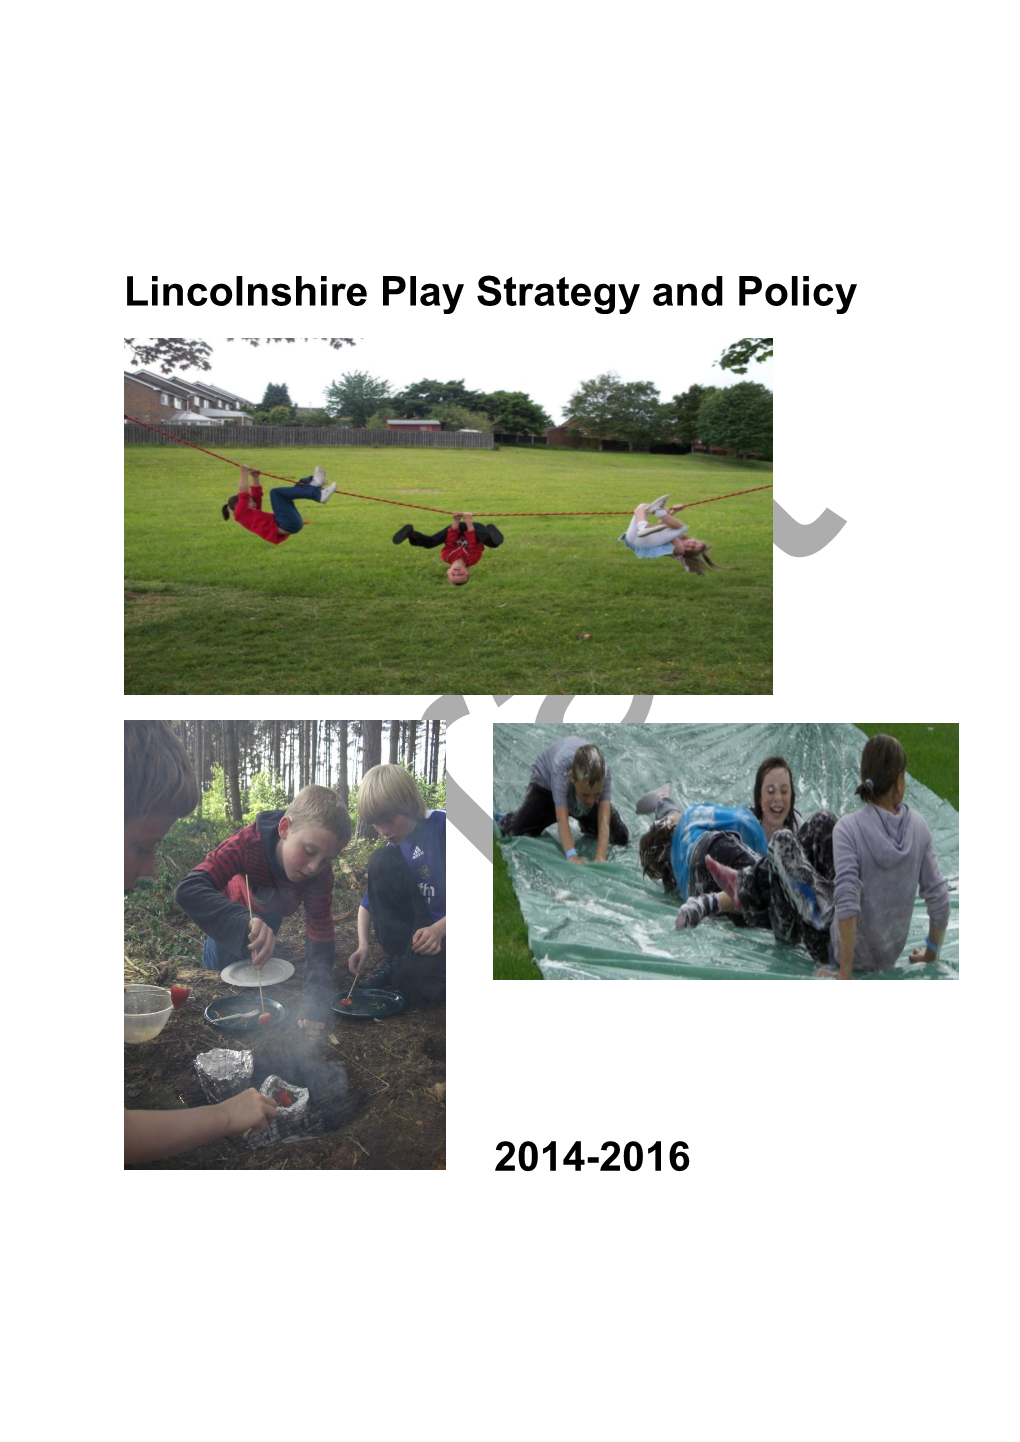 Lincolnshire Play Strategy and Policy 2014-2016